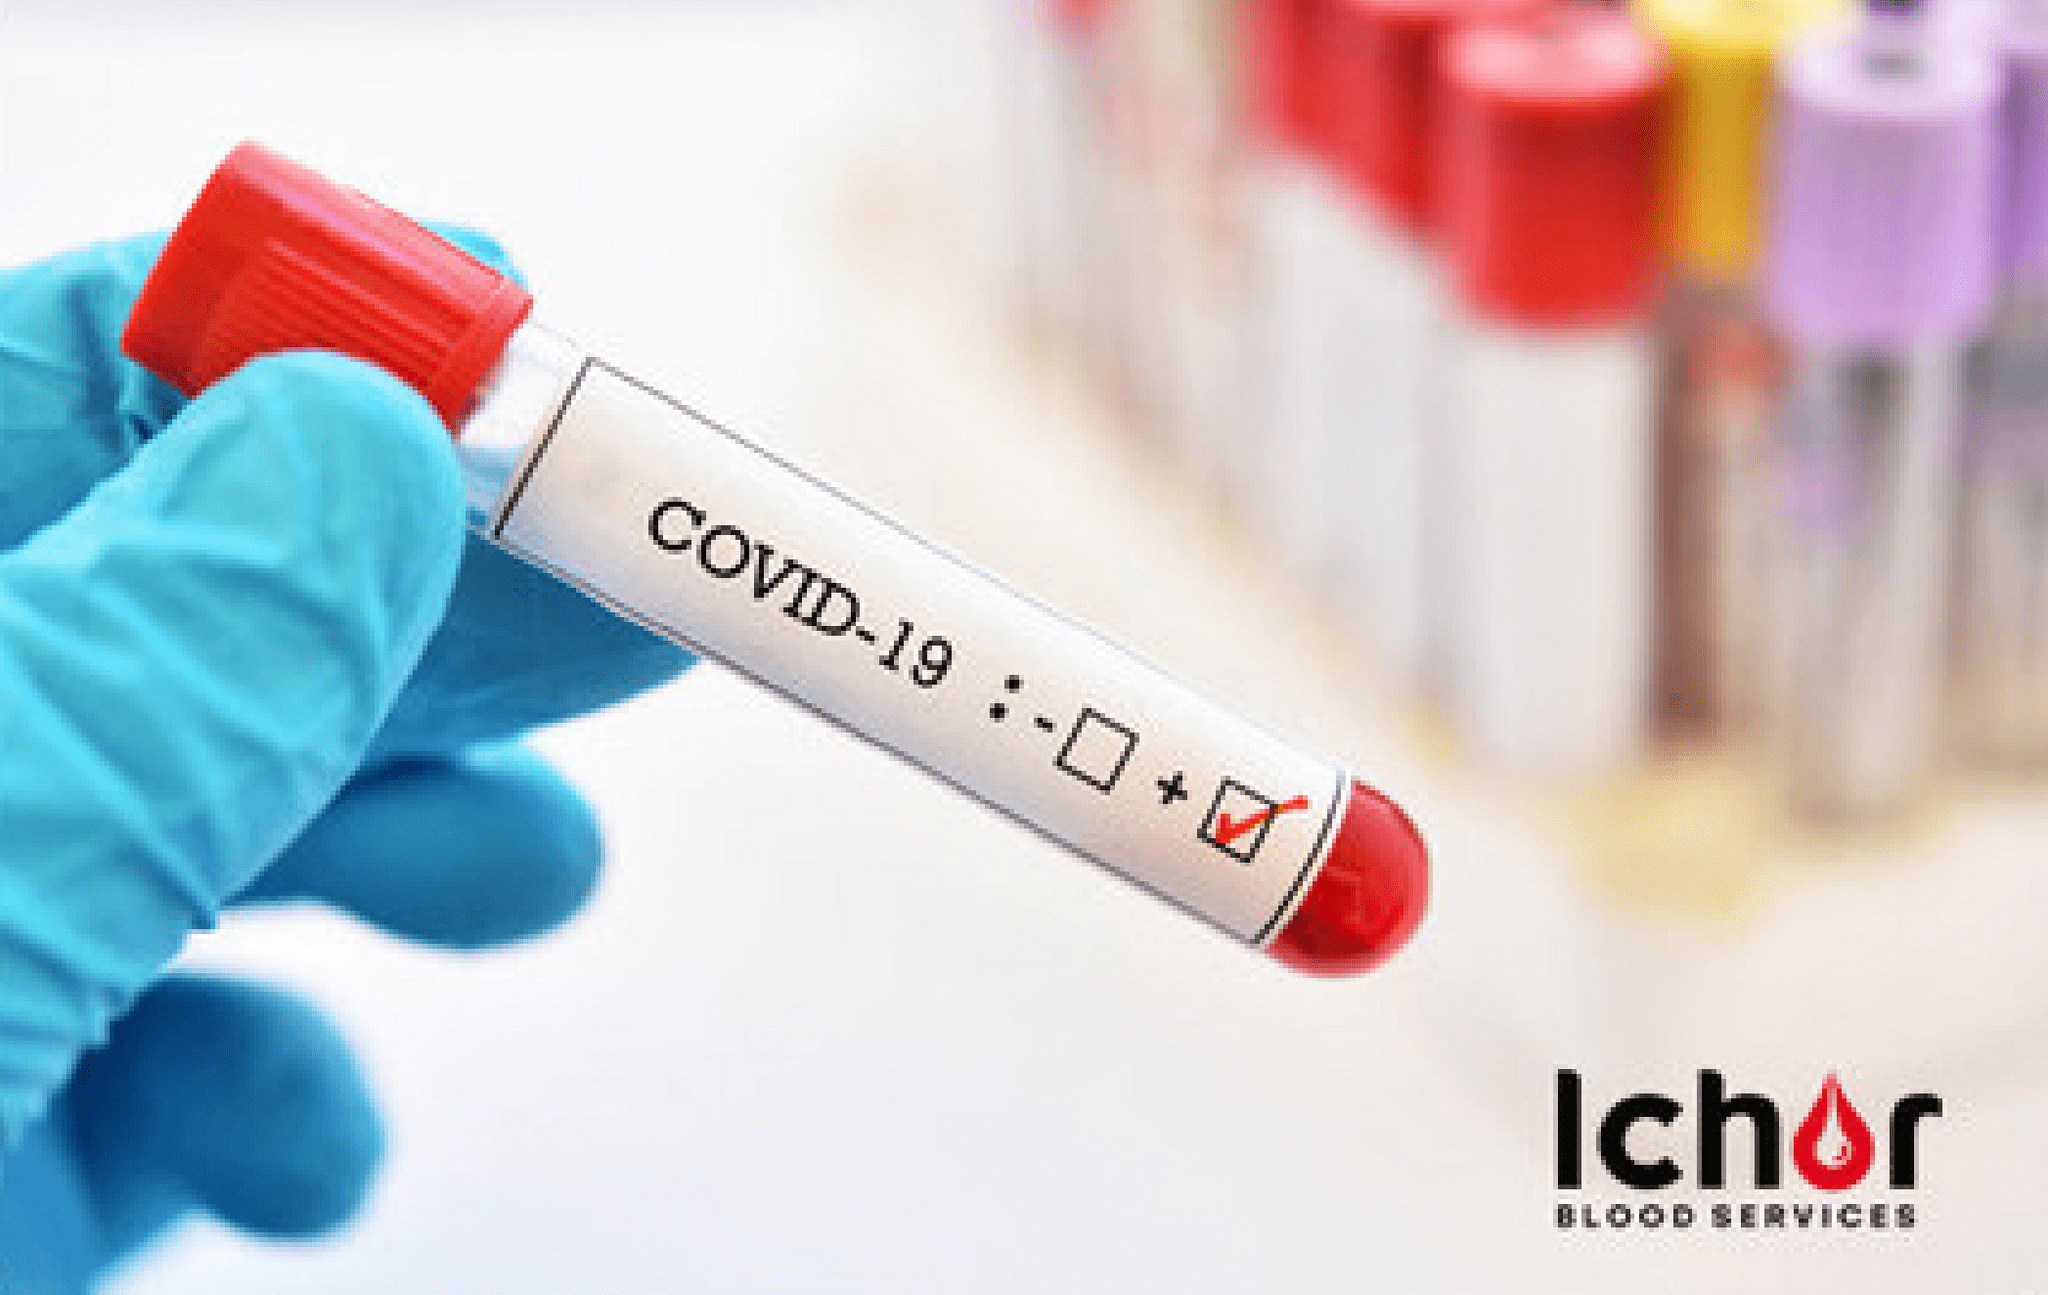 Ichor Blood Services Scales Alberta Operations to Manage COVID-19 Testing Demand